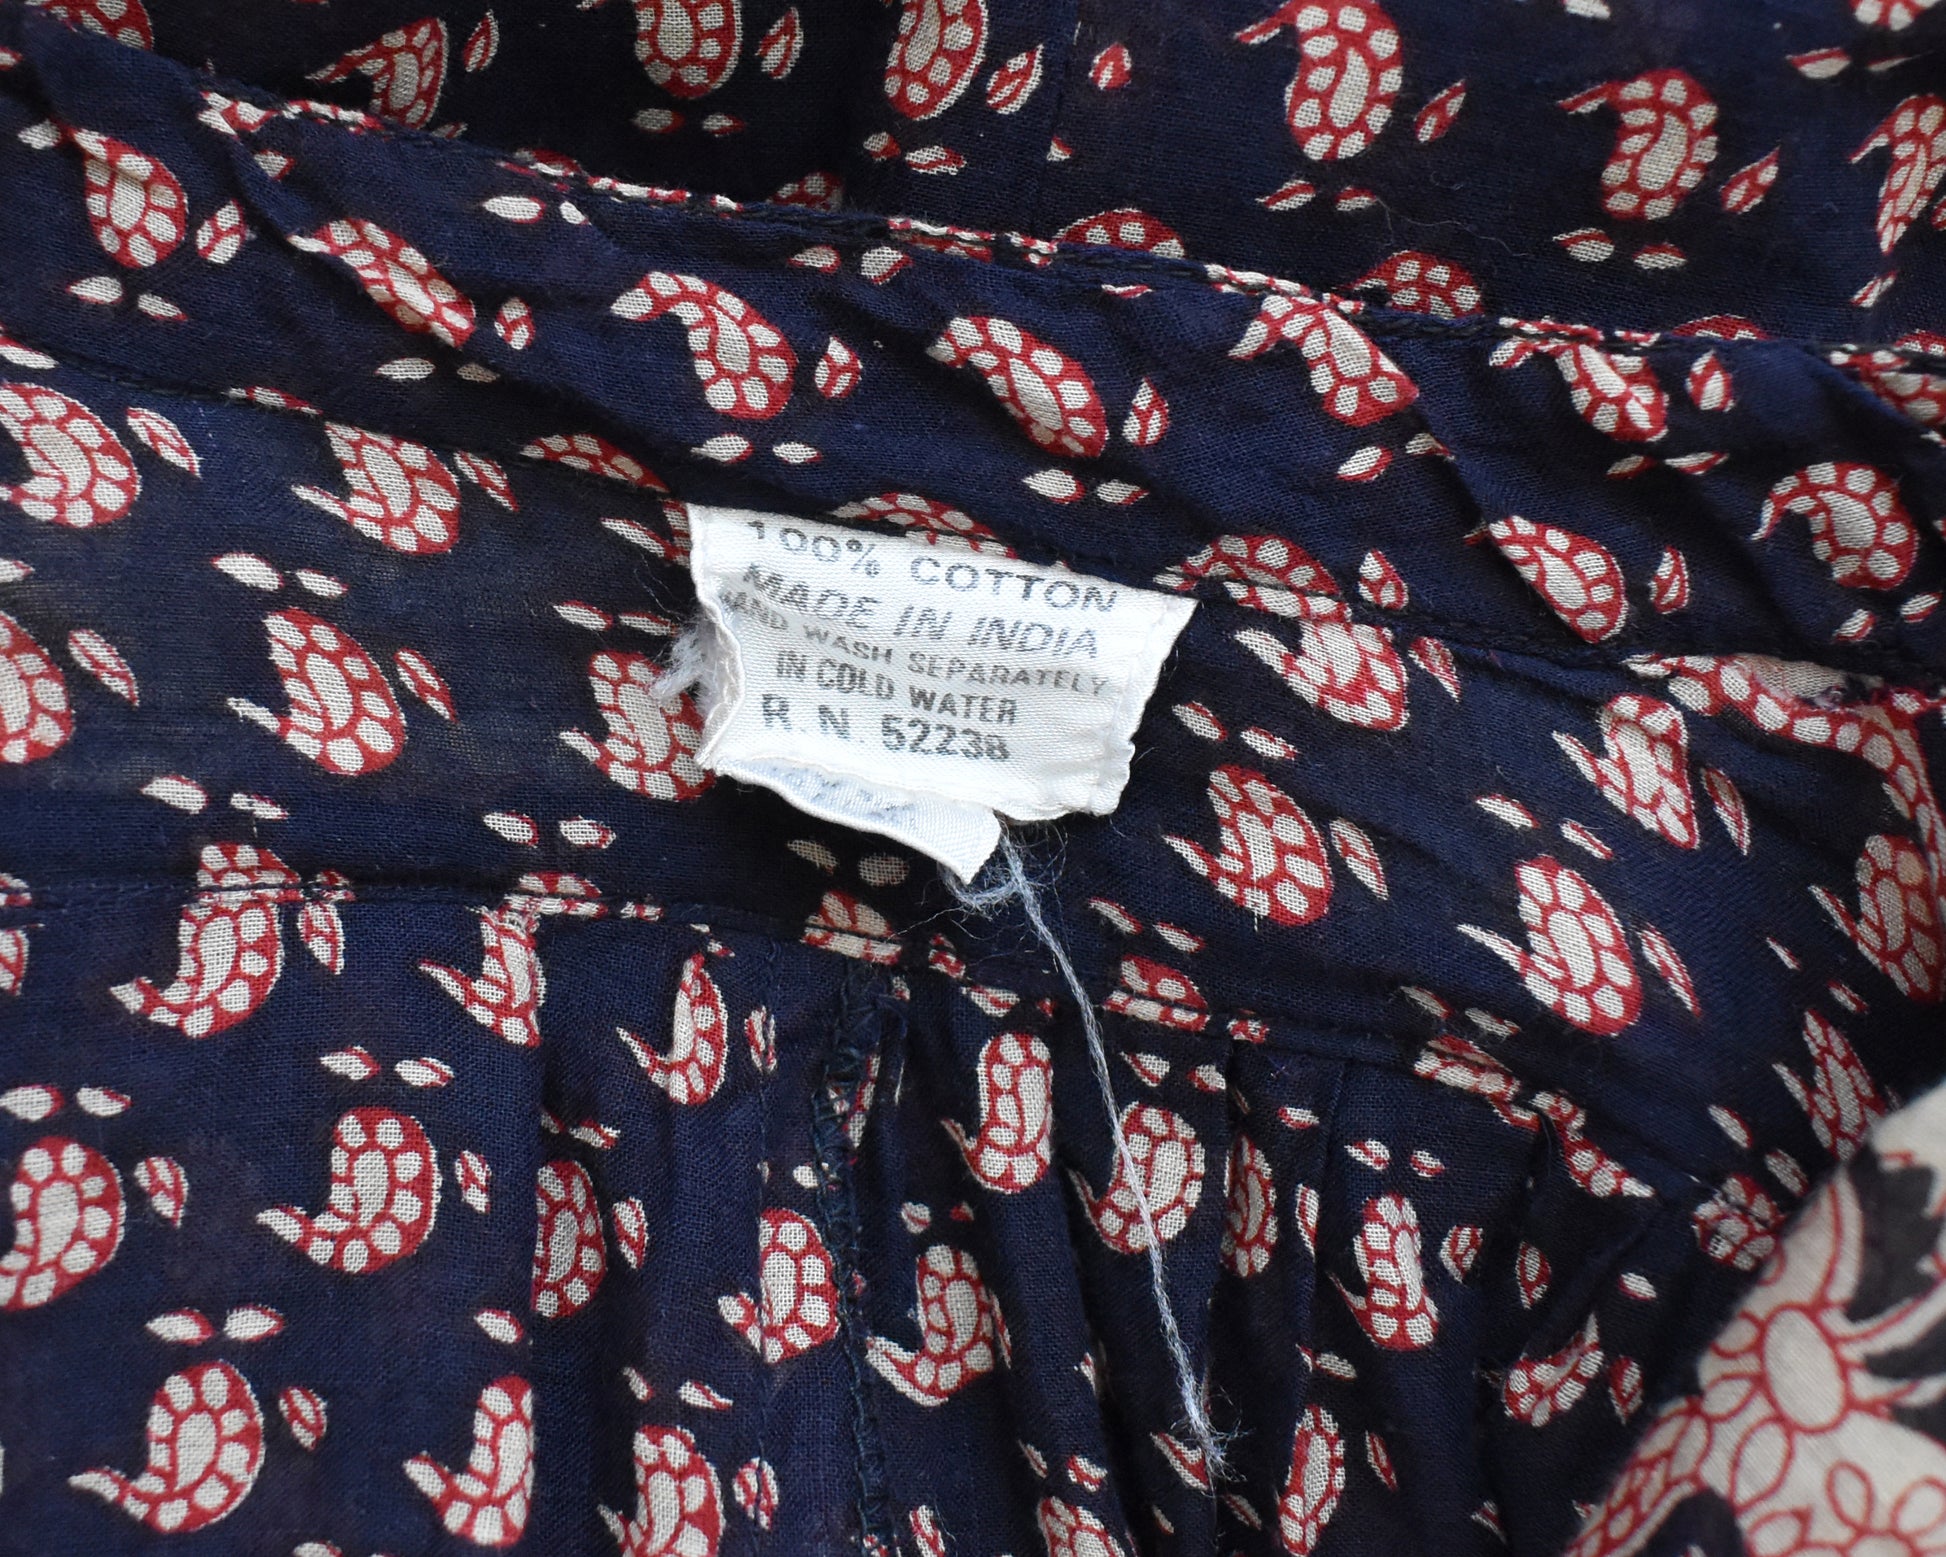 Close up of the tag that says 100% cotton, made in India